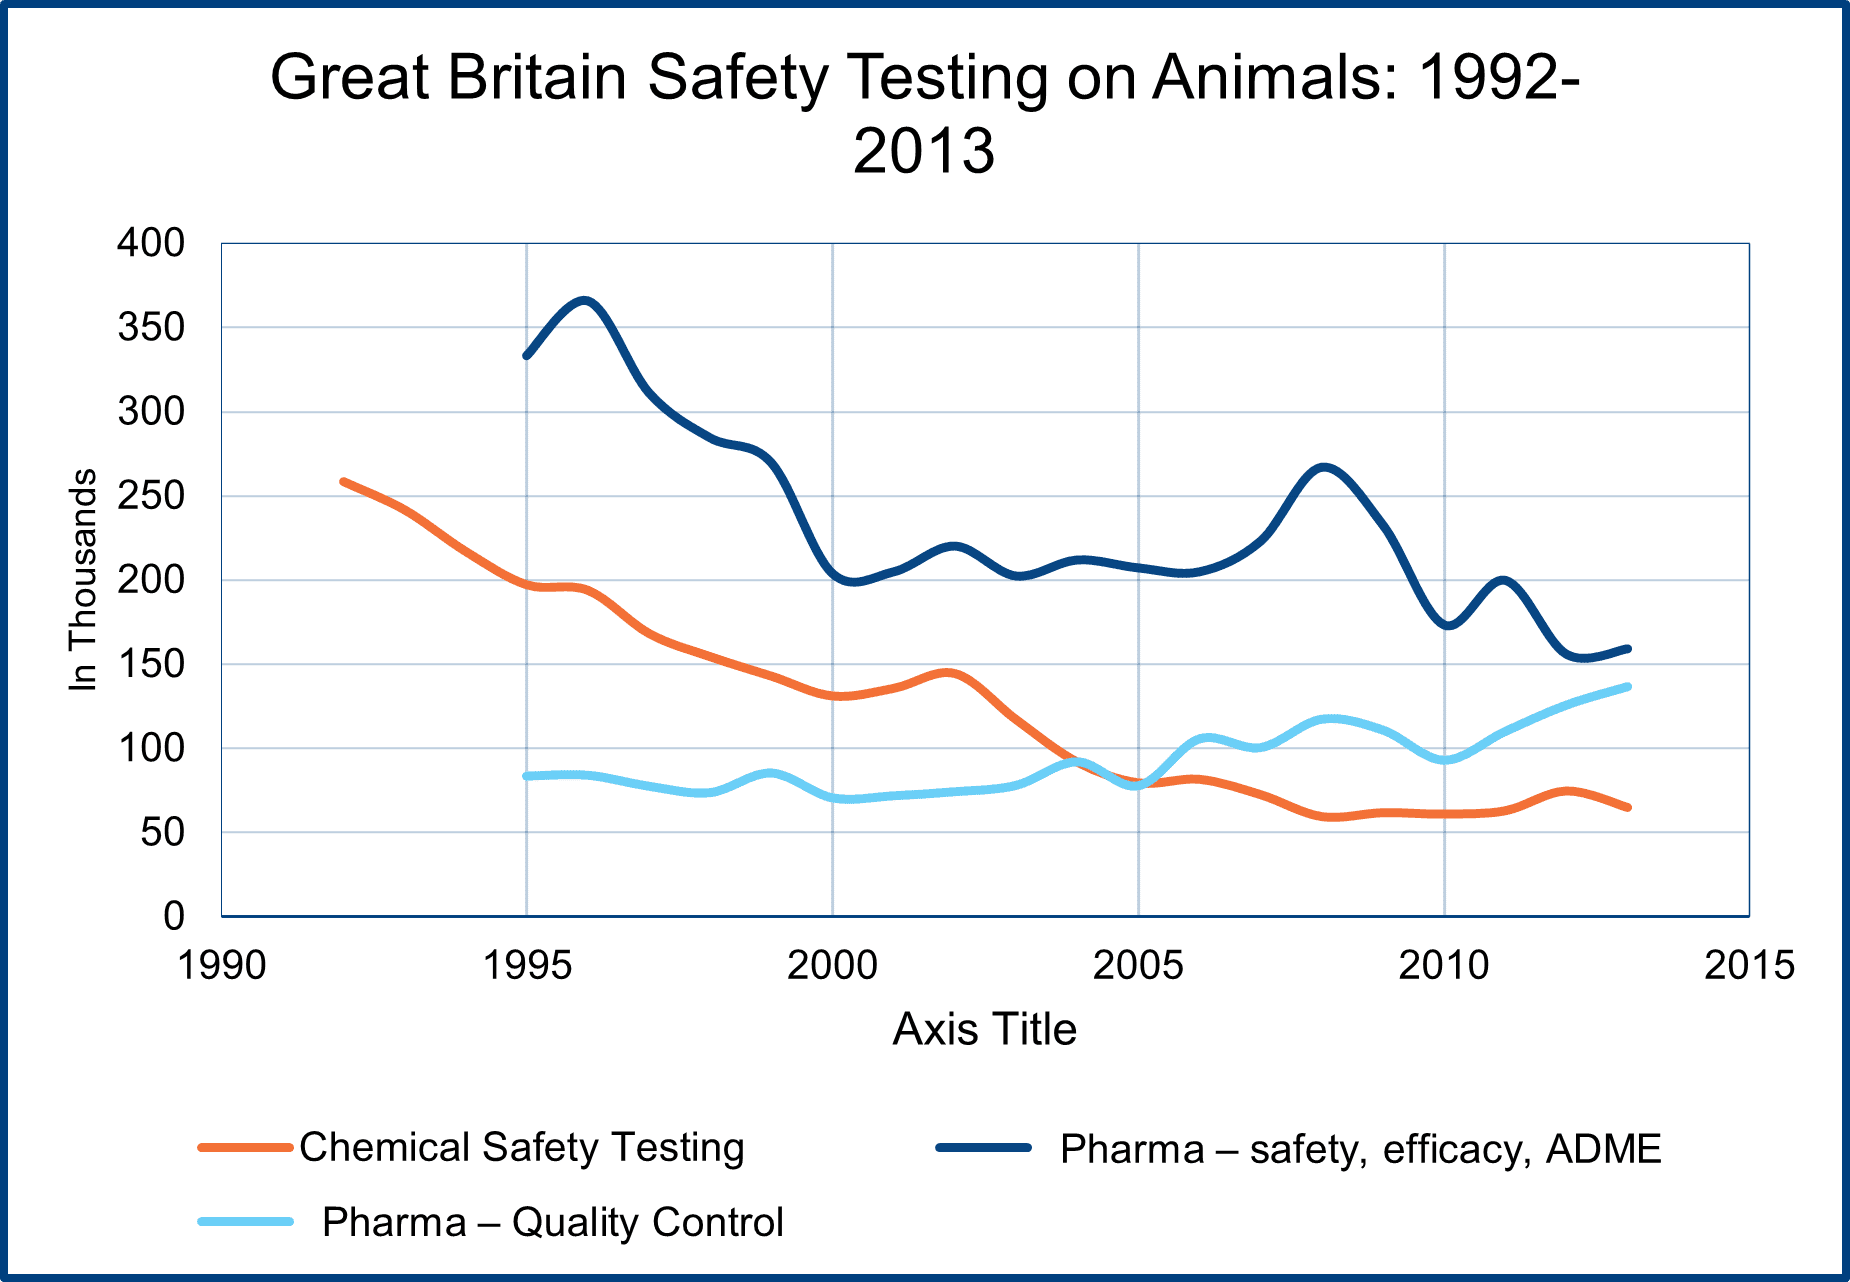 Great Britain Safety Test chart